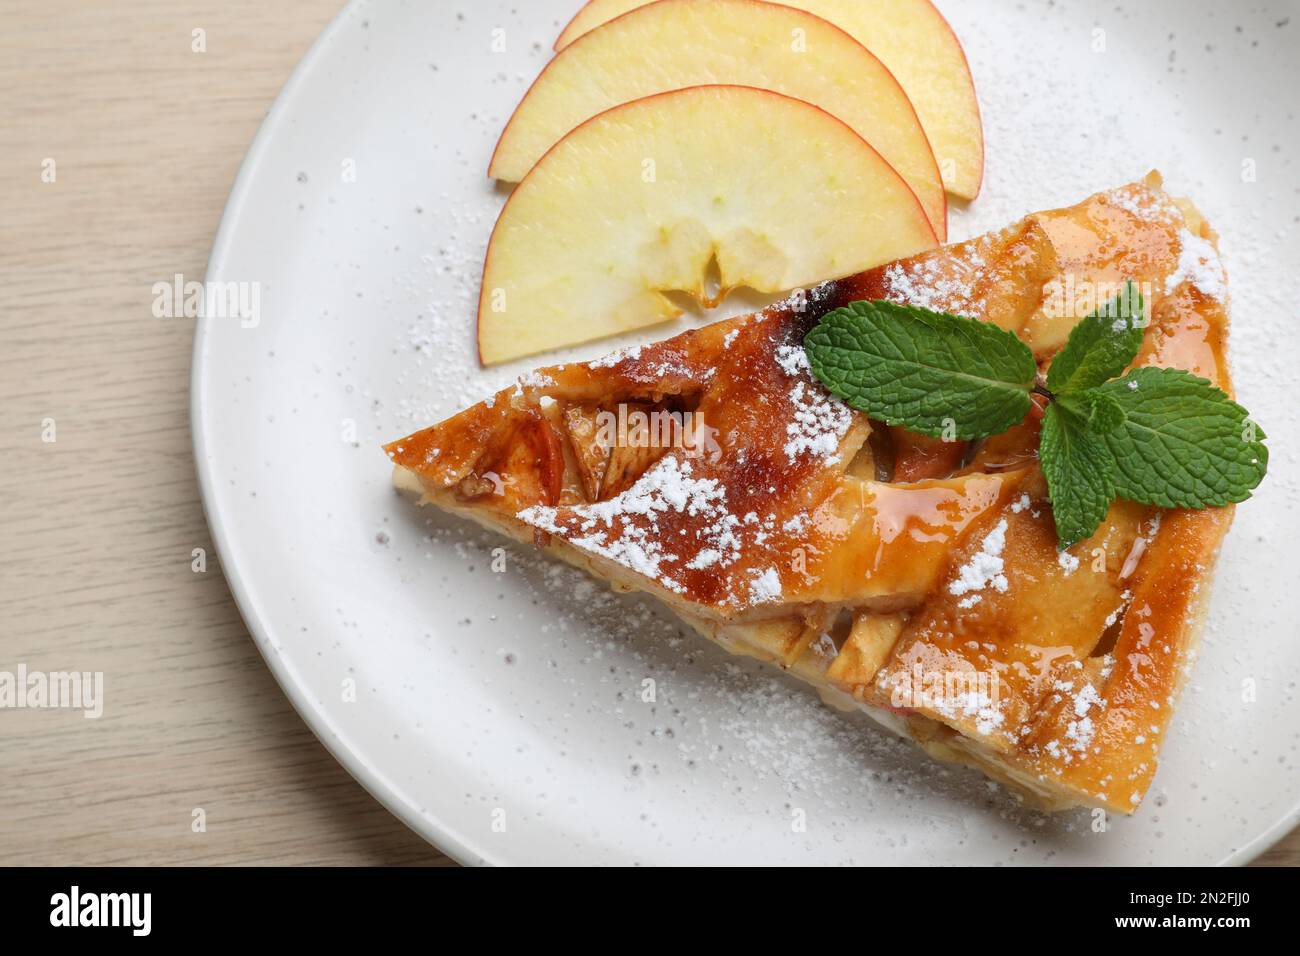 Slice of traditional apple pie on wooden table, top view Stock Photo